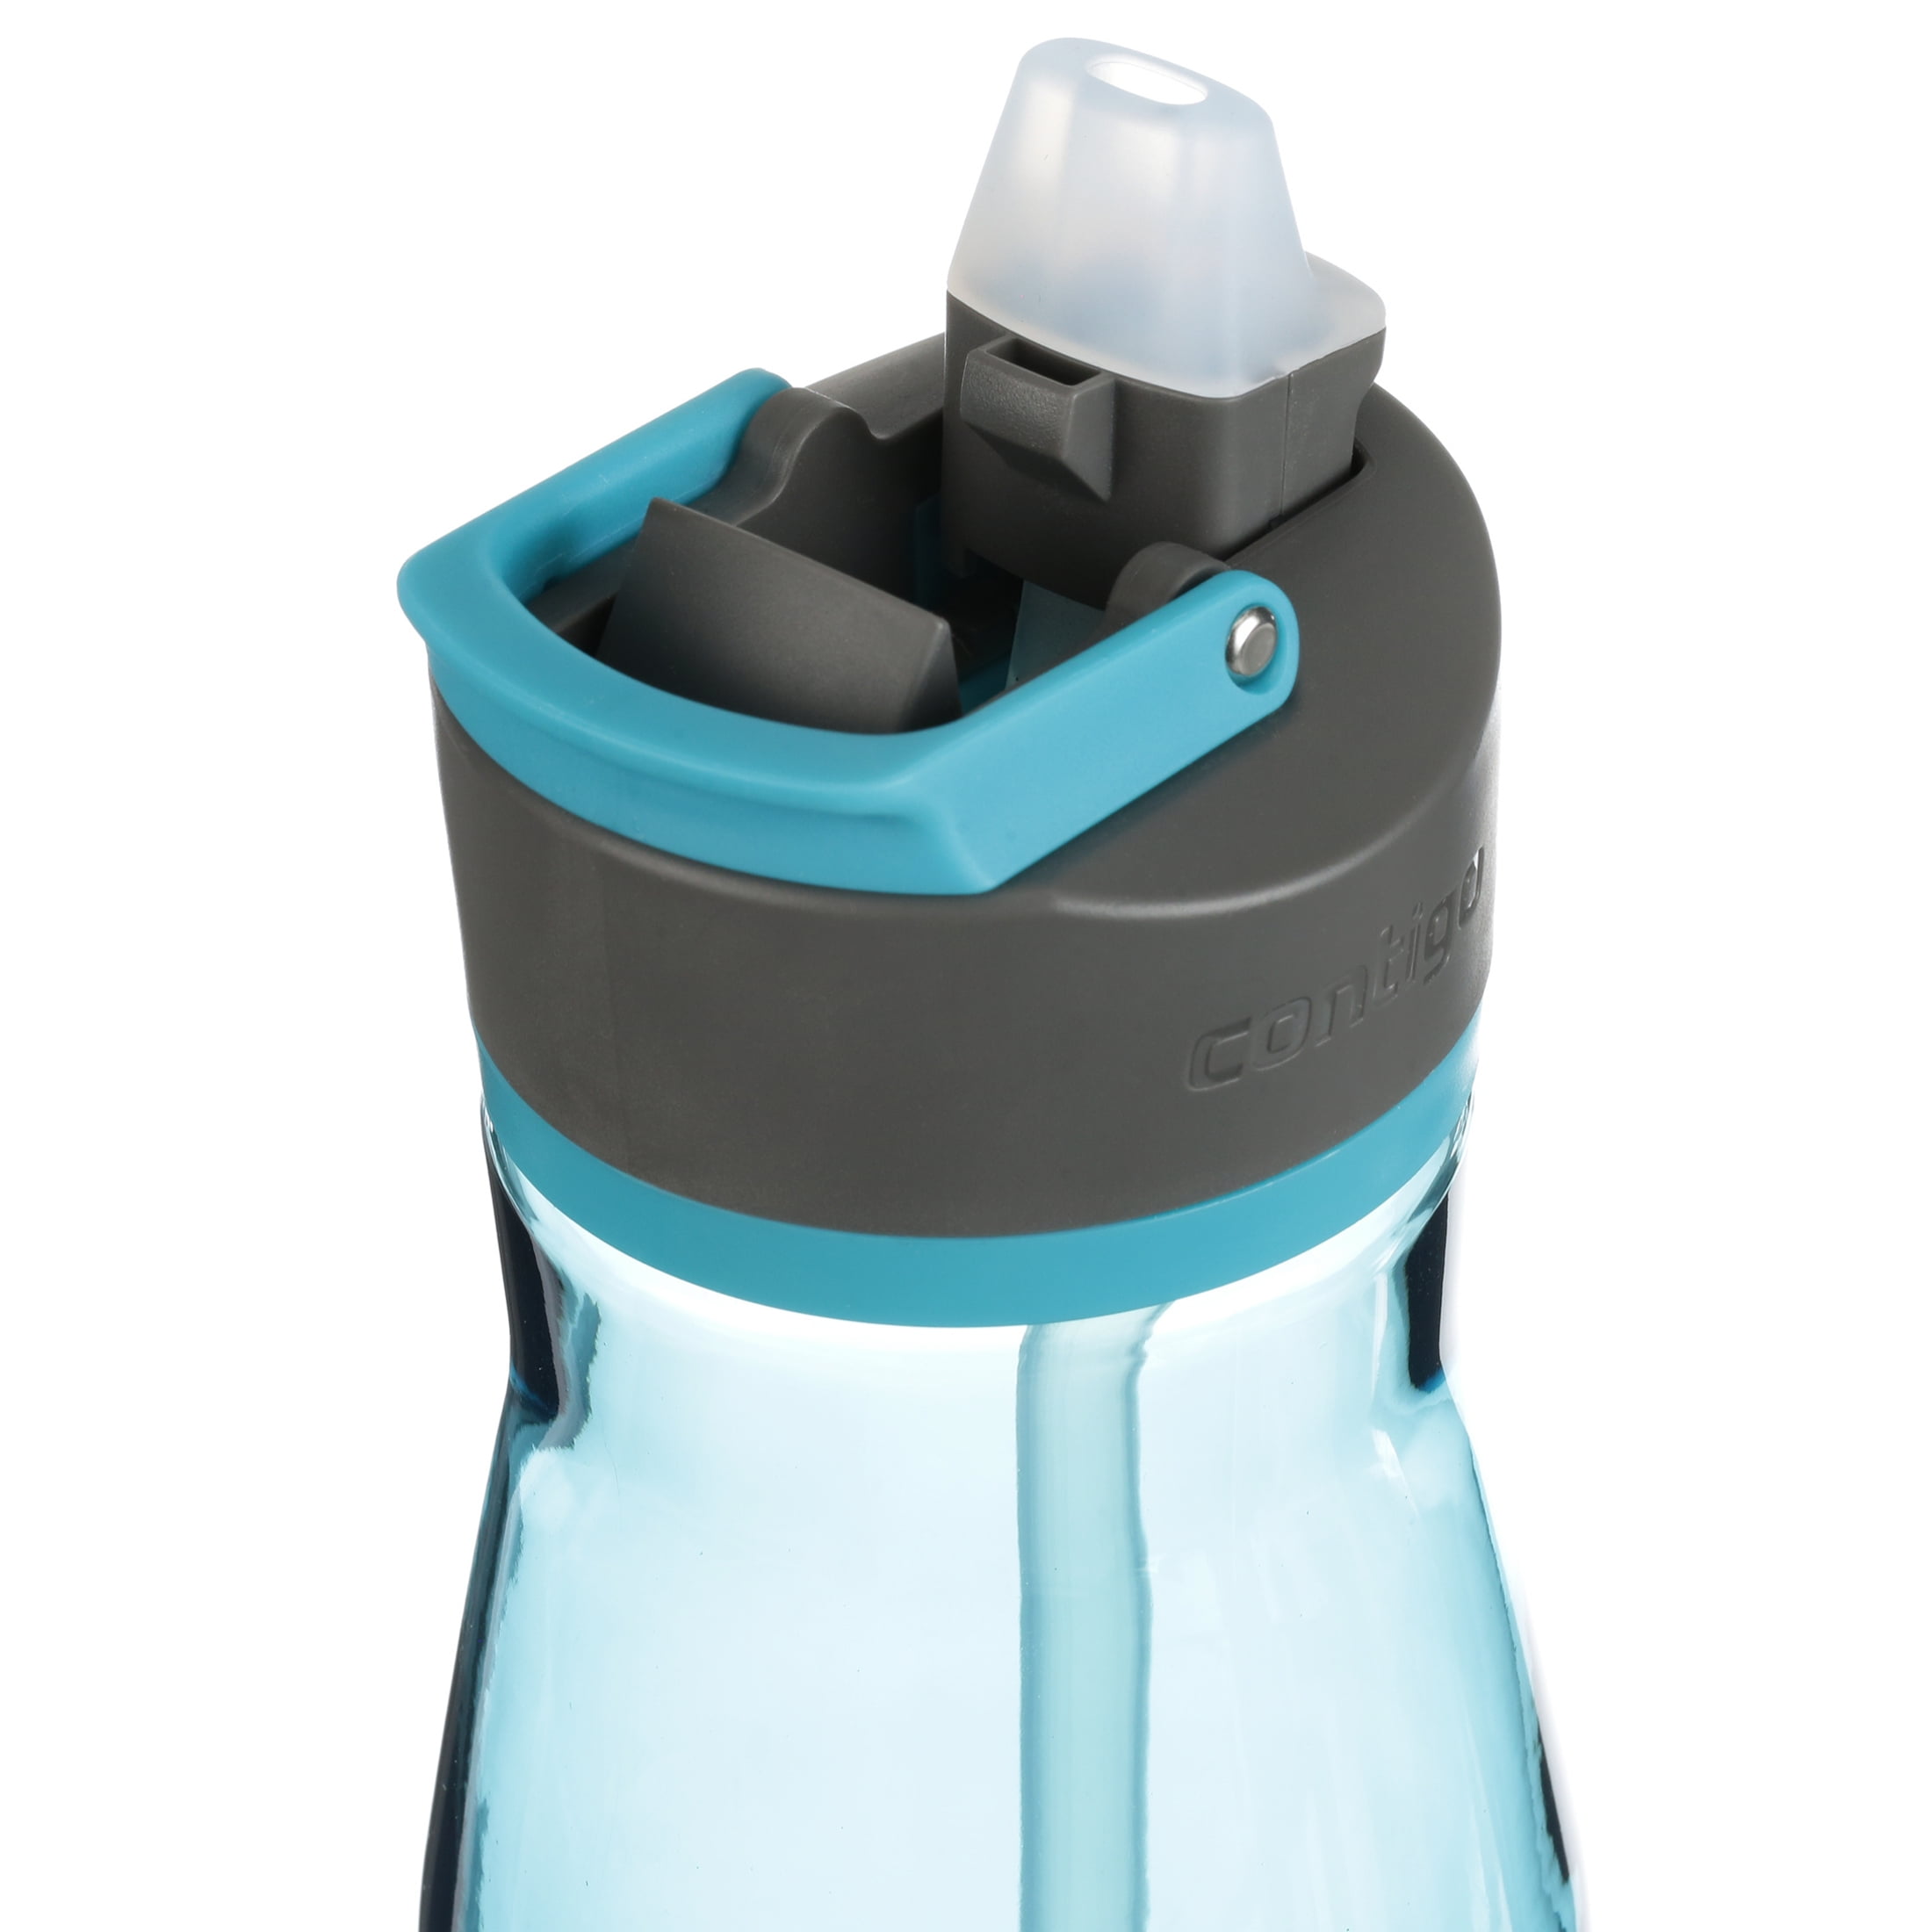  Contigo Jackson 2.0 BPA-Free Plastic Water Bottle with  Leak-Proof Lid, Chug Mouth Design with Interchangeable Lid and Handle,  Dishwasher Safe, 40oz Blueberry : Sports & Outdoors